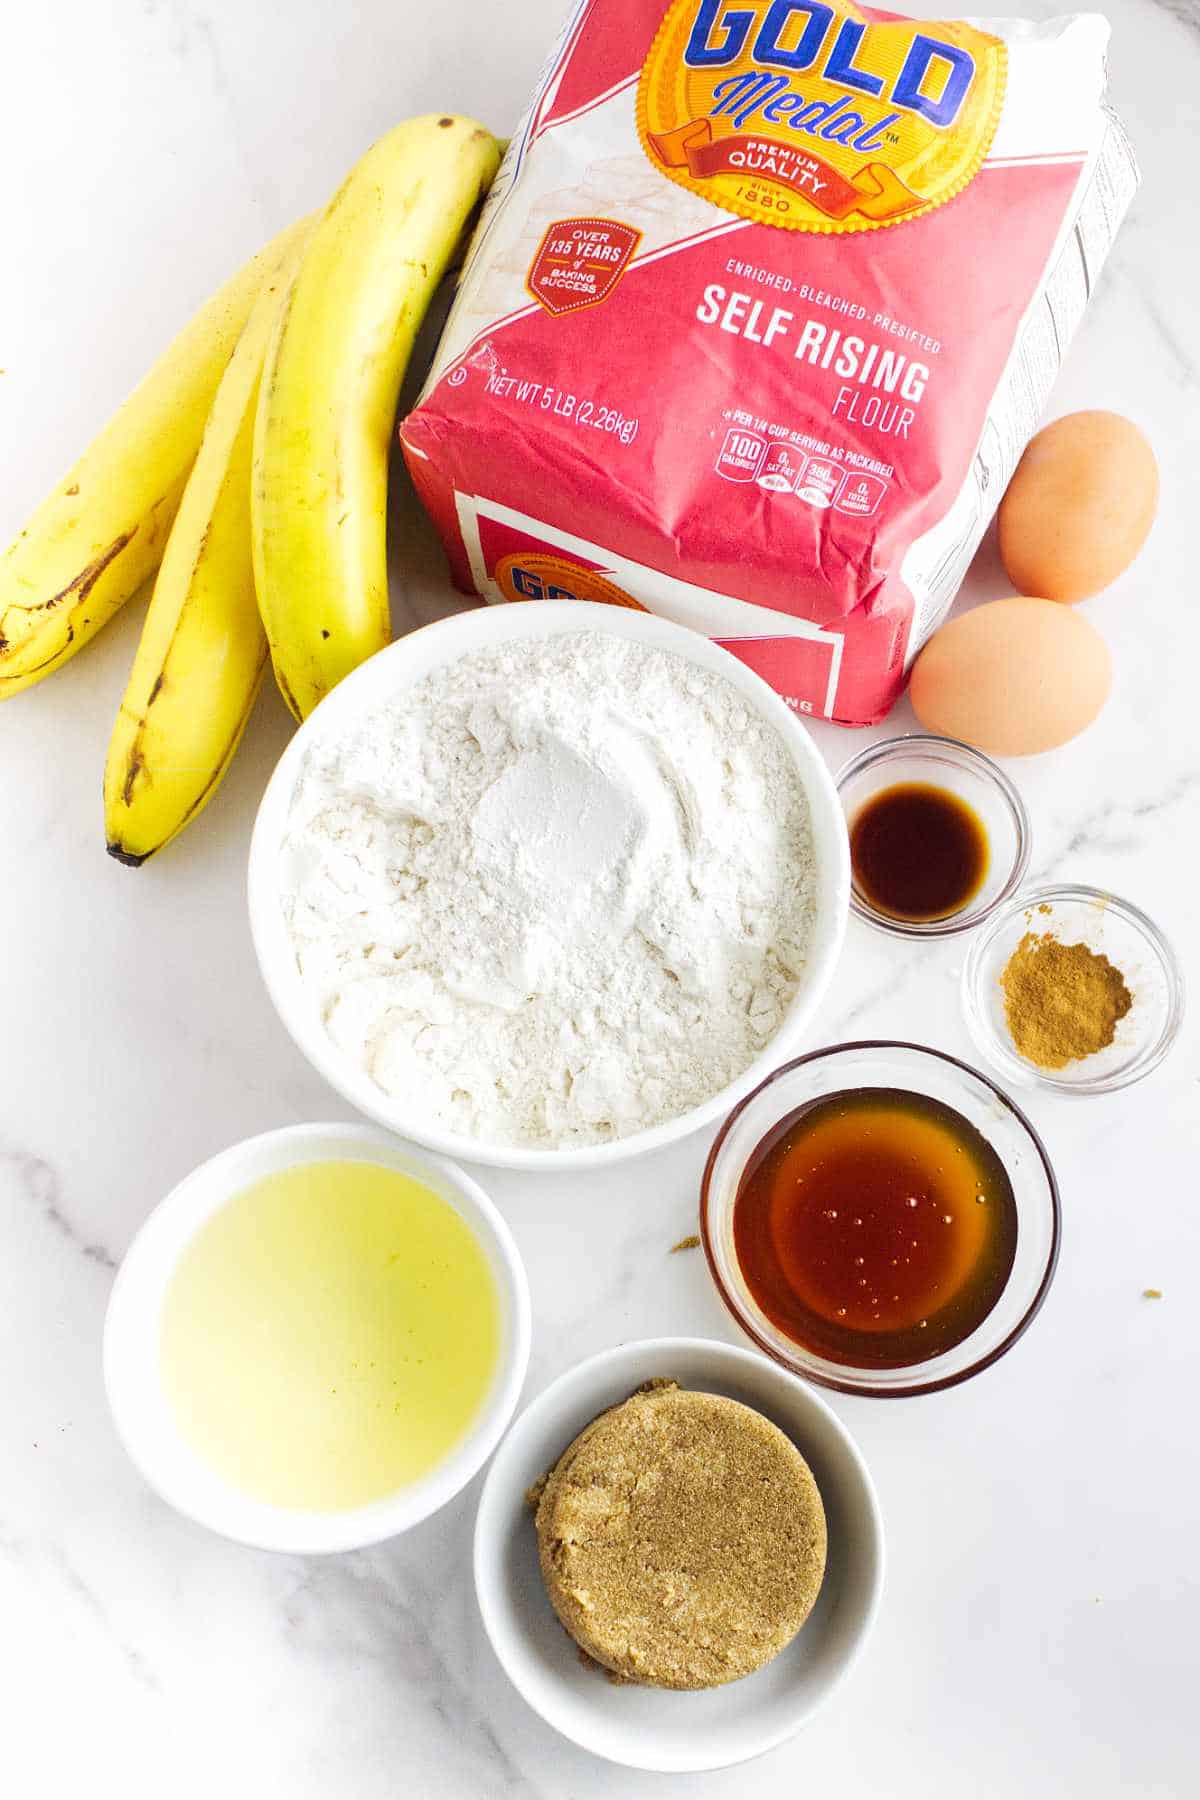 ingredients for making Banana Bread with Self-Rising Flour.